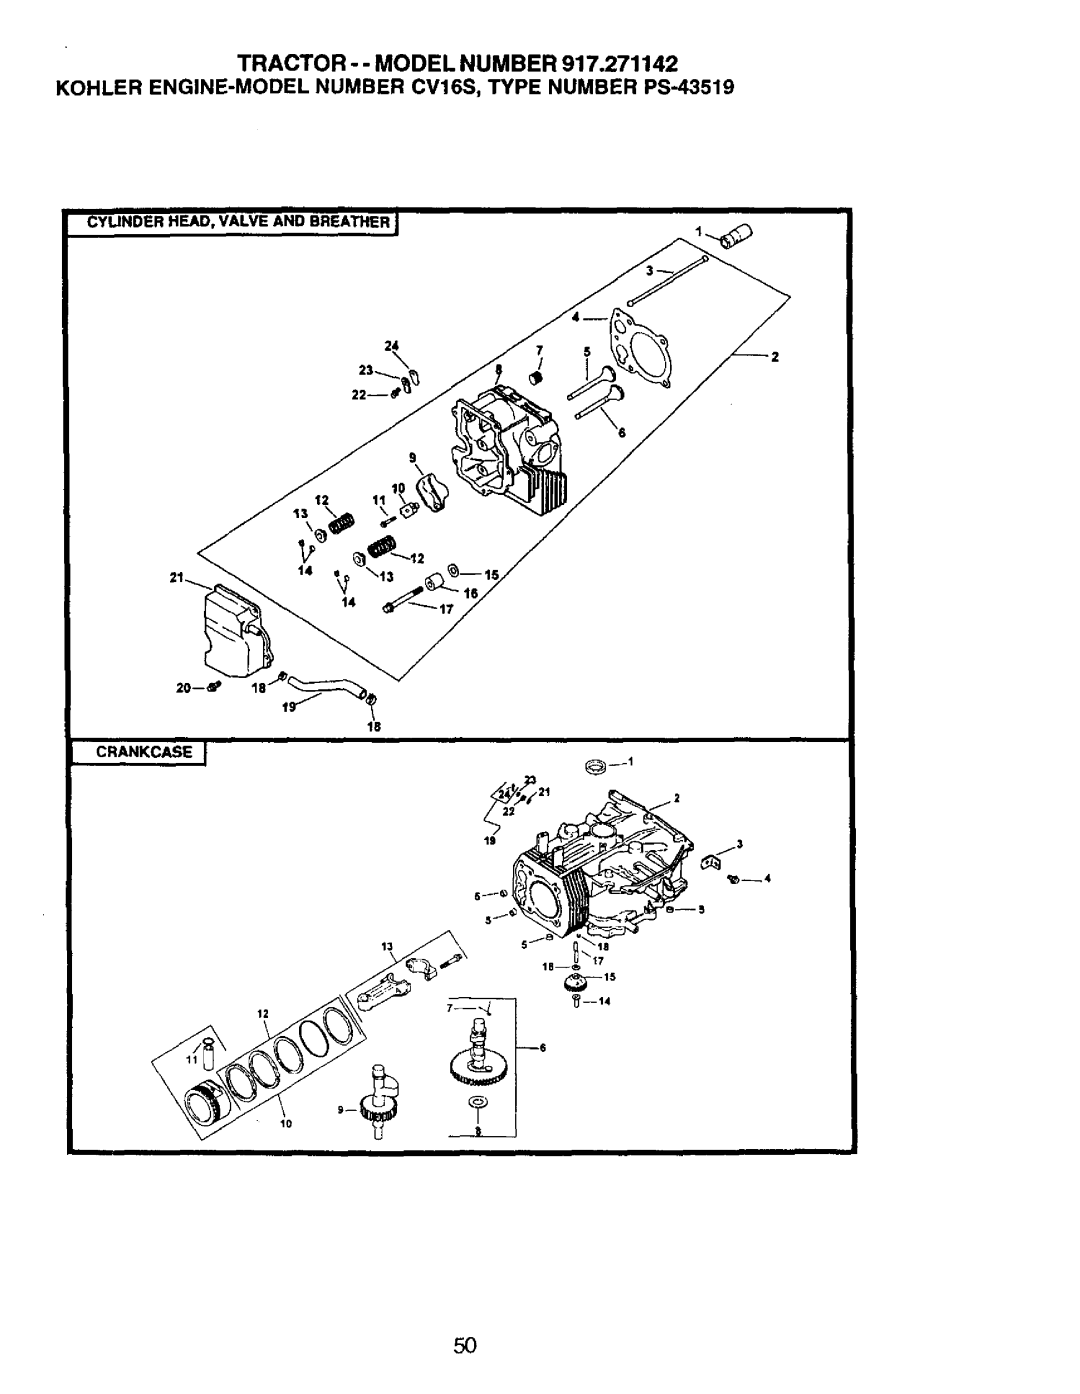 Craftsman 917.271142 manual CYLINDER HEAD, VALVE AND BREATHER 2, Crankcase 